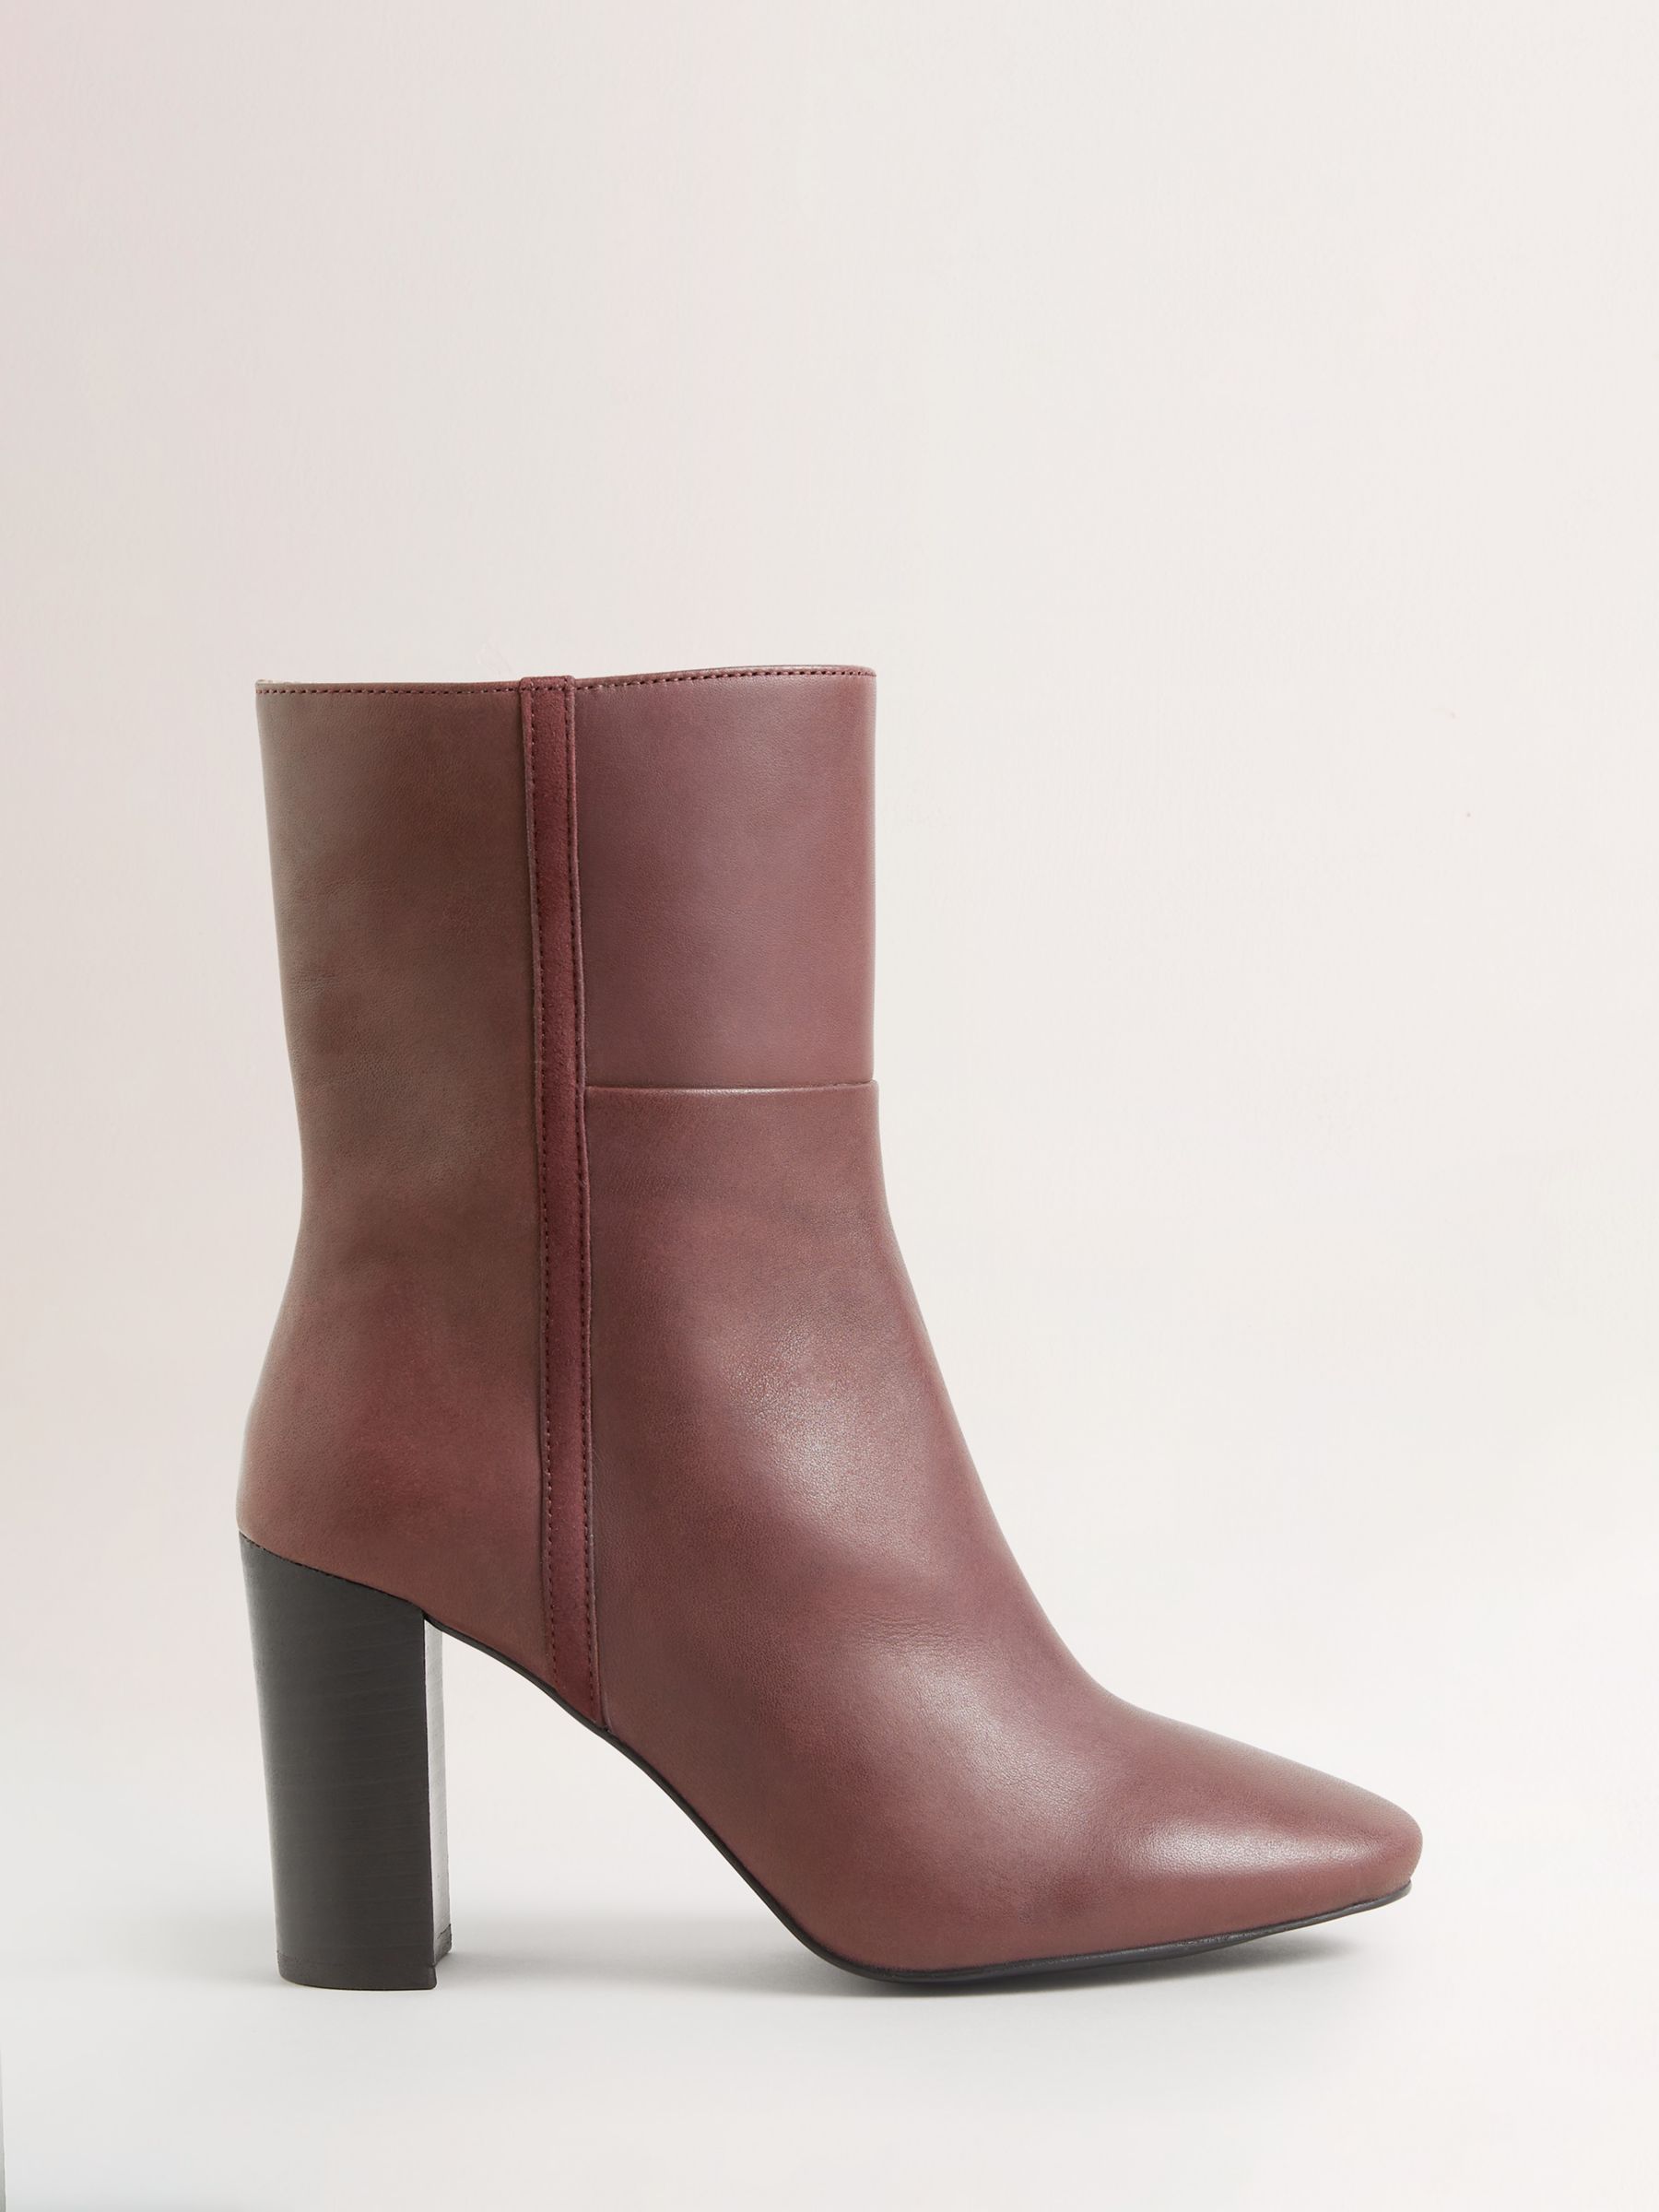 Boden Leather Ankle Boots, Maroon, 4